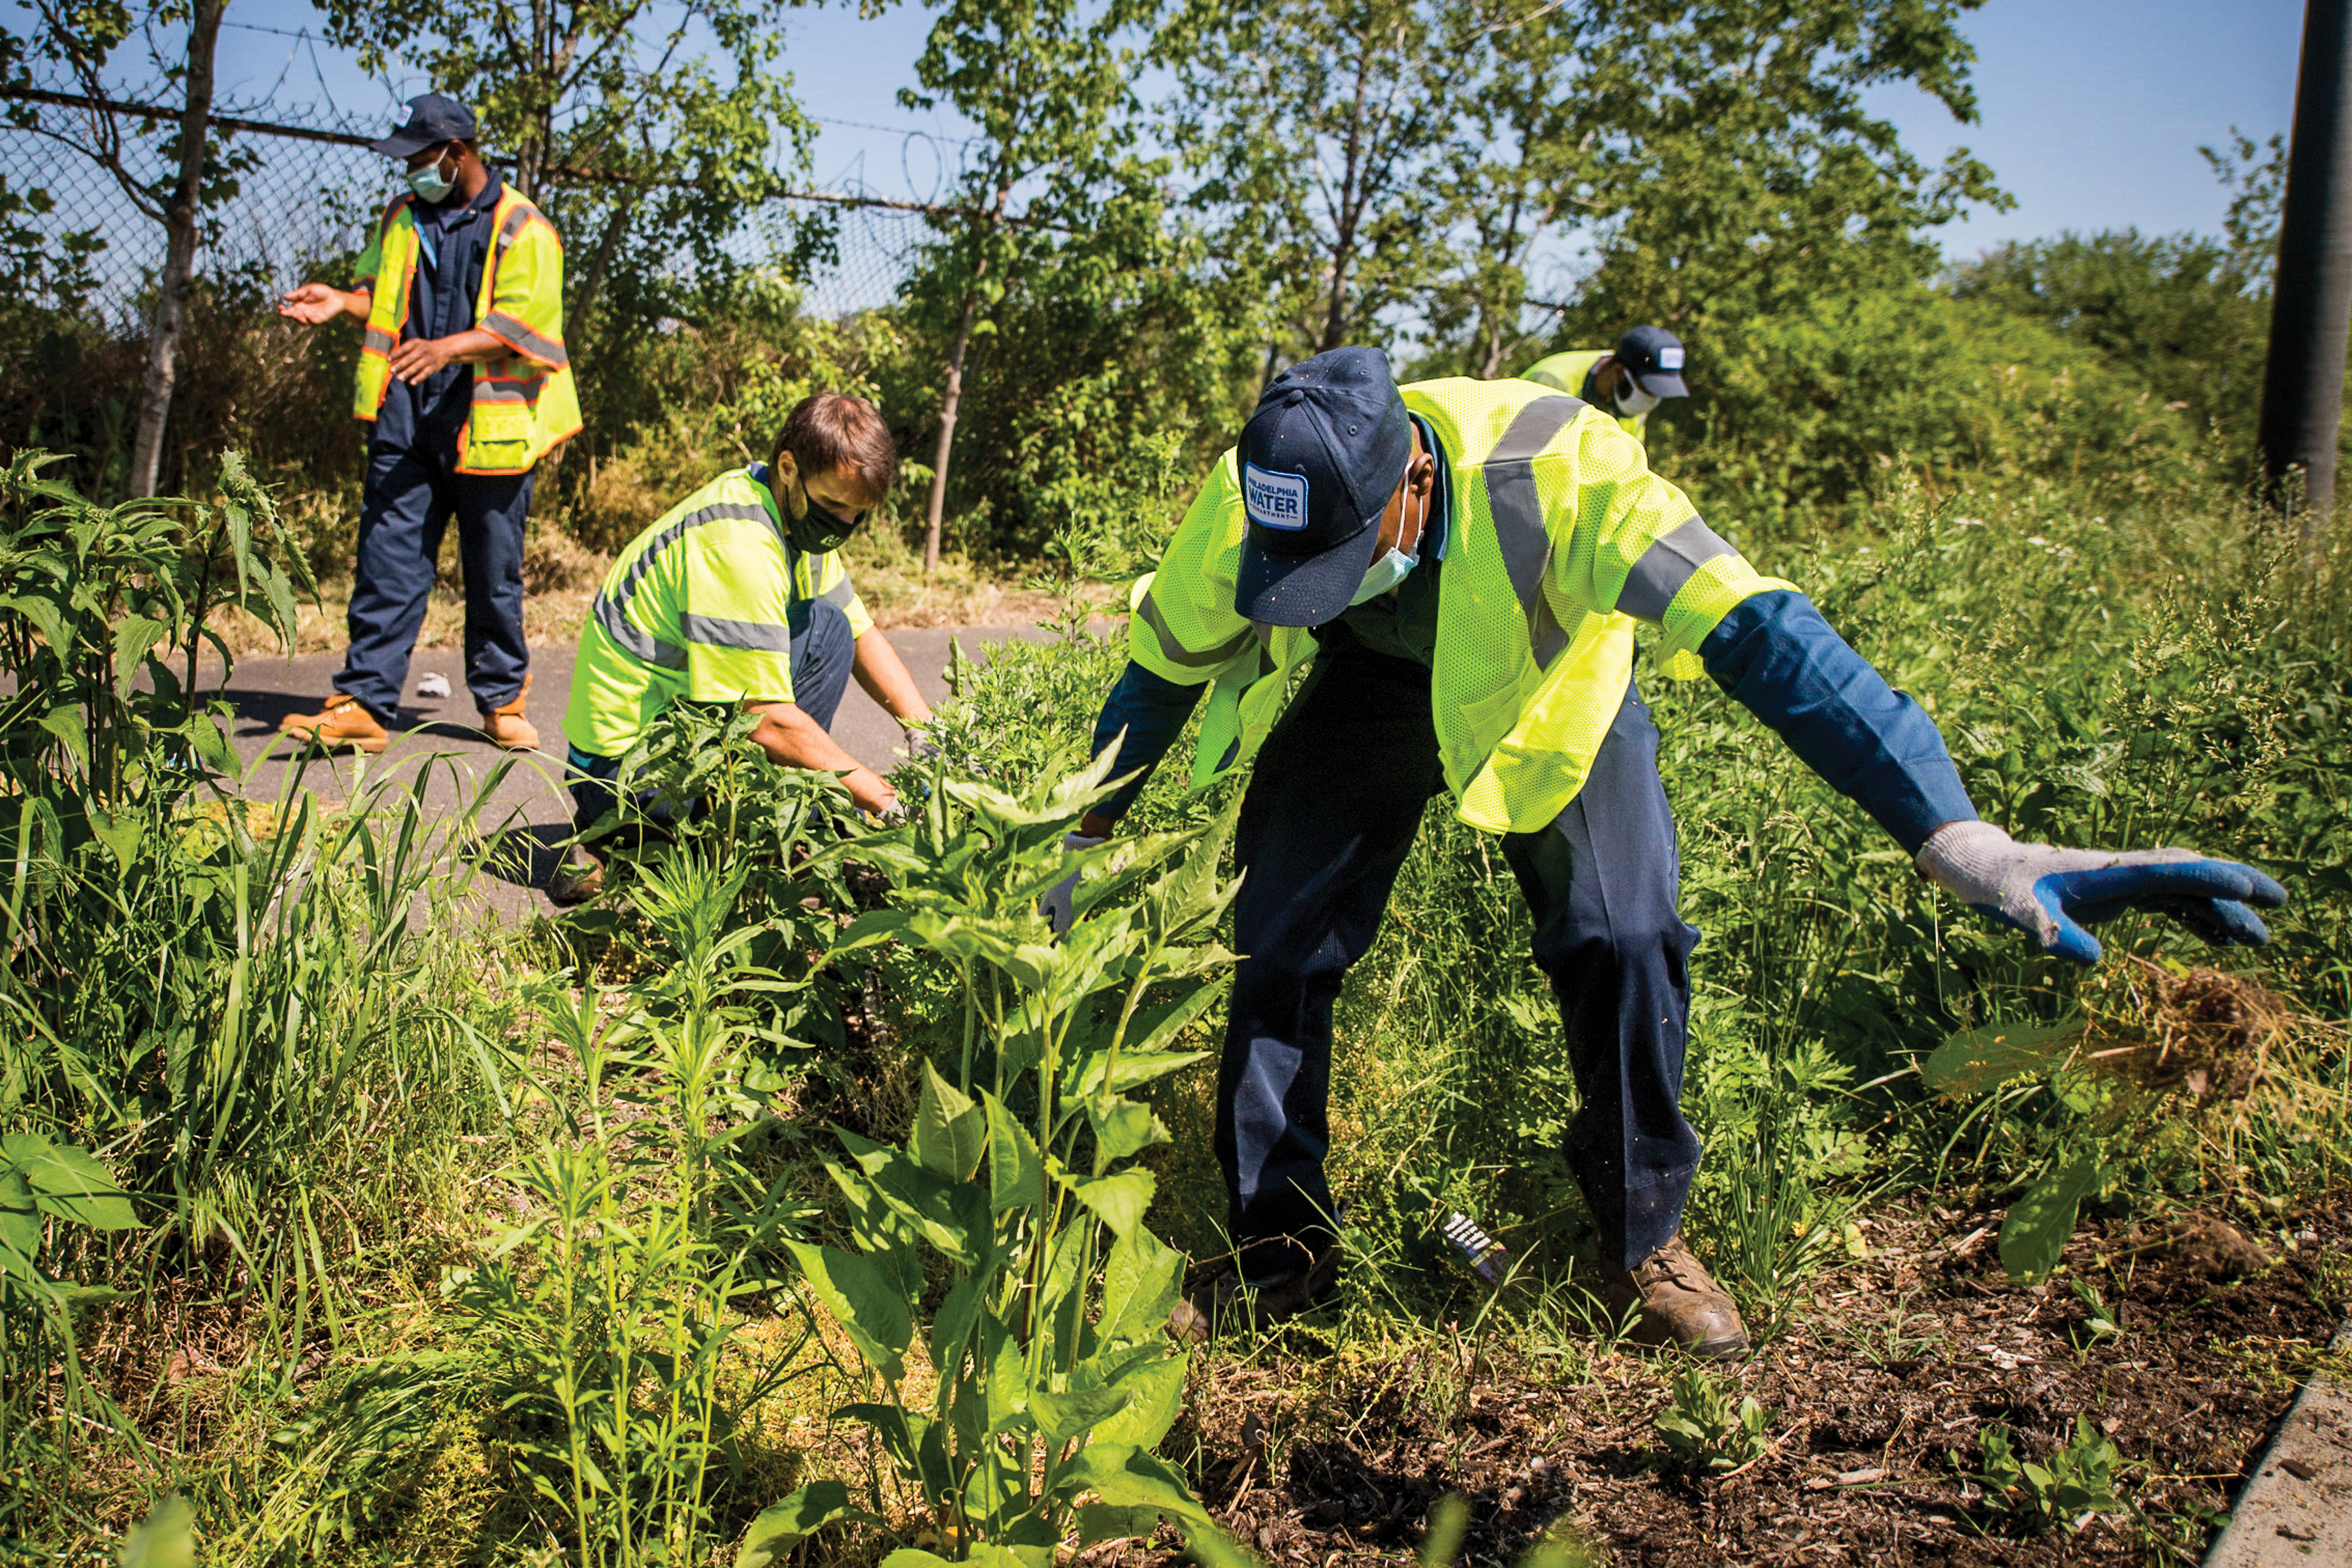 Members of the Green Stormwater Operations unit in blue shirts, pants, and hats, along with neon yellow safety vests, work gloves, and boots, pull weeds and check on plantings in a rain garden.